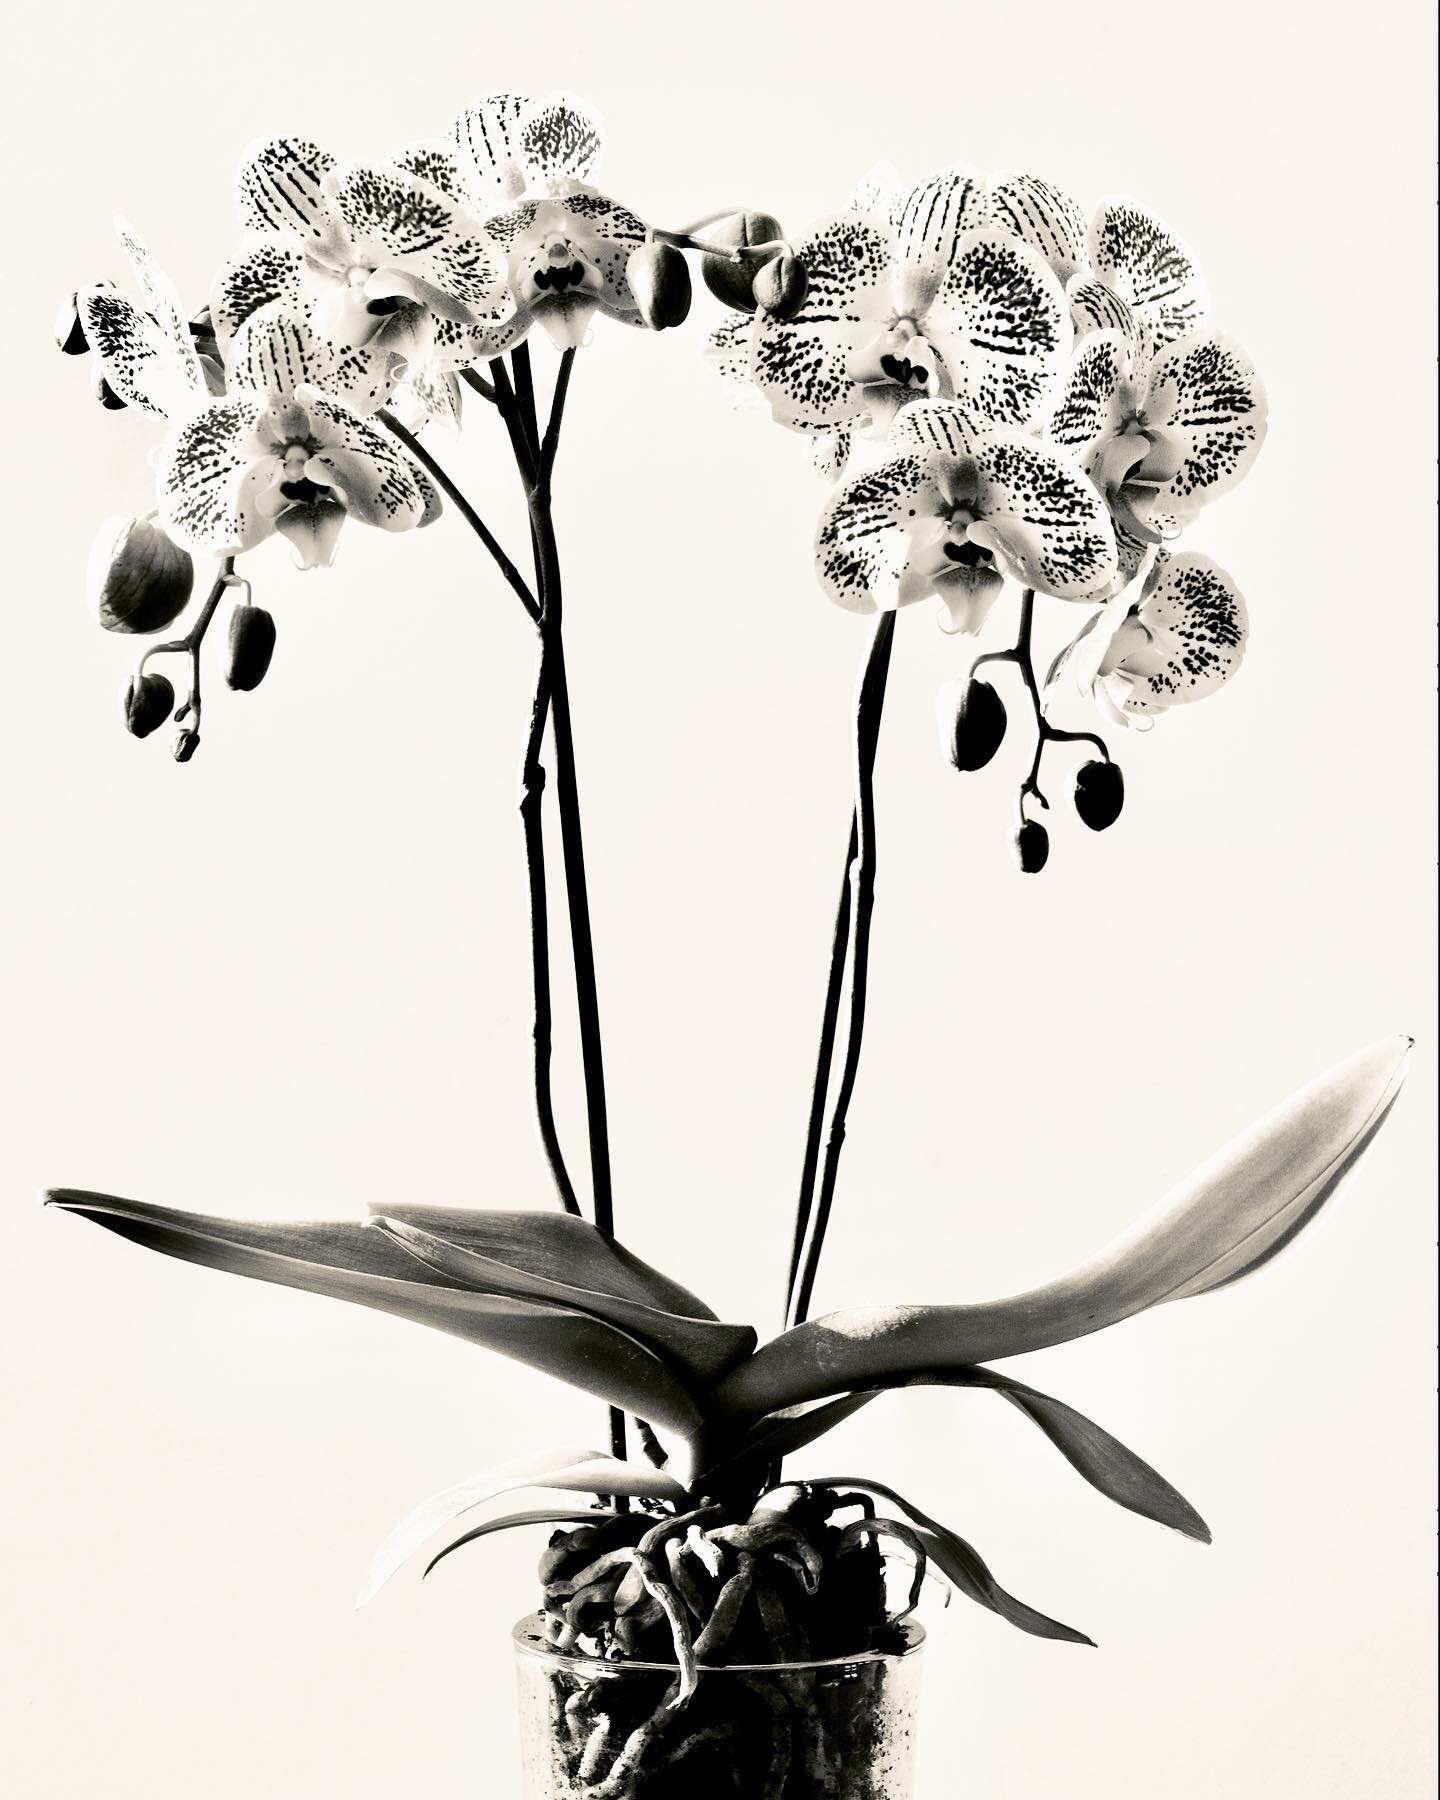 Orchid obsession
On a recent visit to @burfordgarden I couldn&rsquo;t resist this beautiful spotty specimen!
#orchid
#botanicalprints
#fineartphotography
#flowers
#blackandwhite